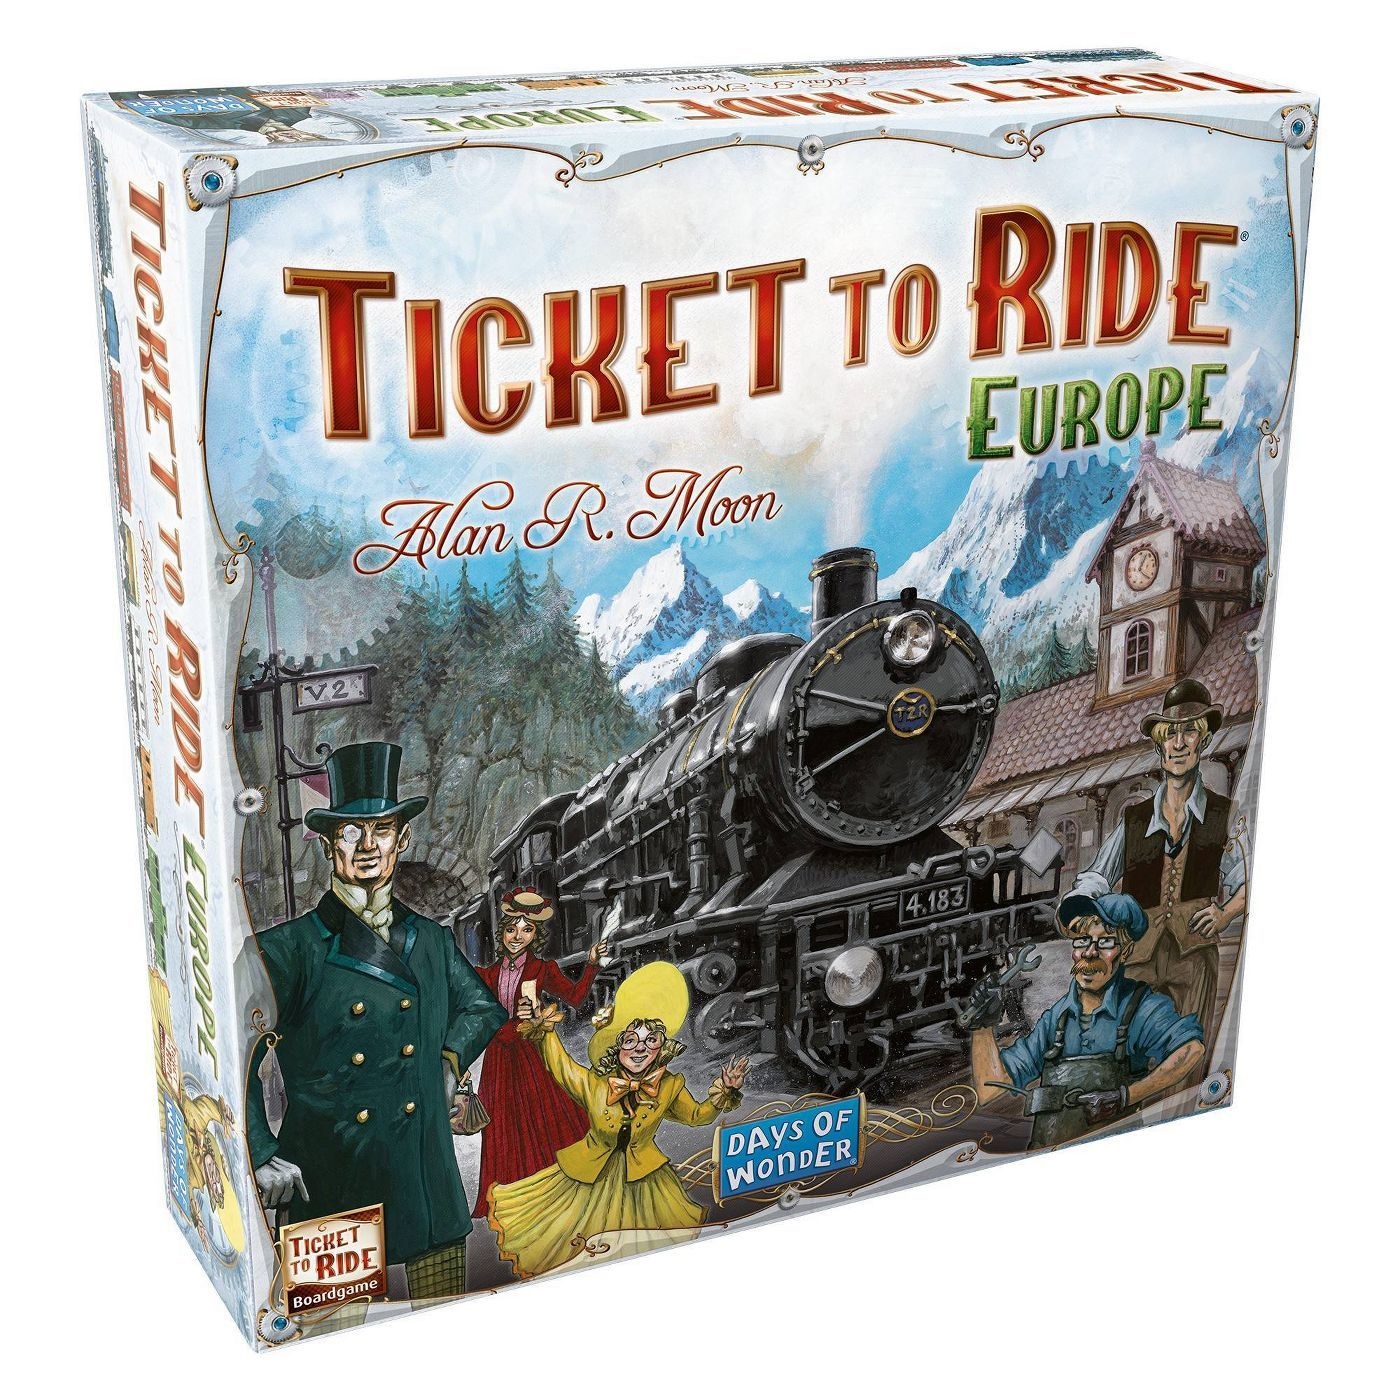 Board game box ticket to ride europe